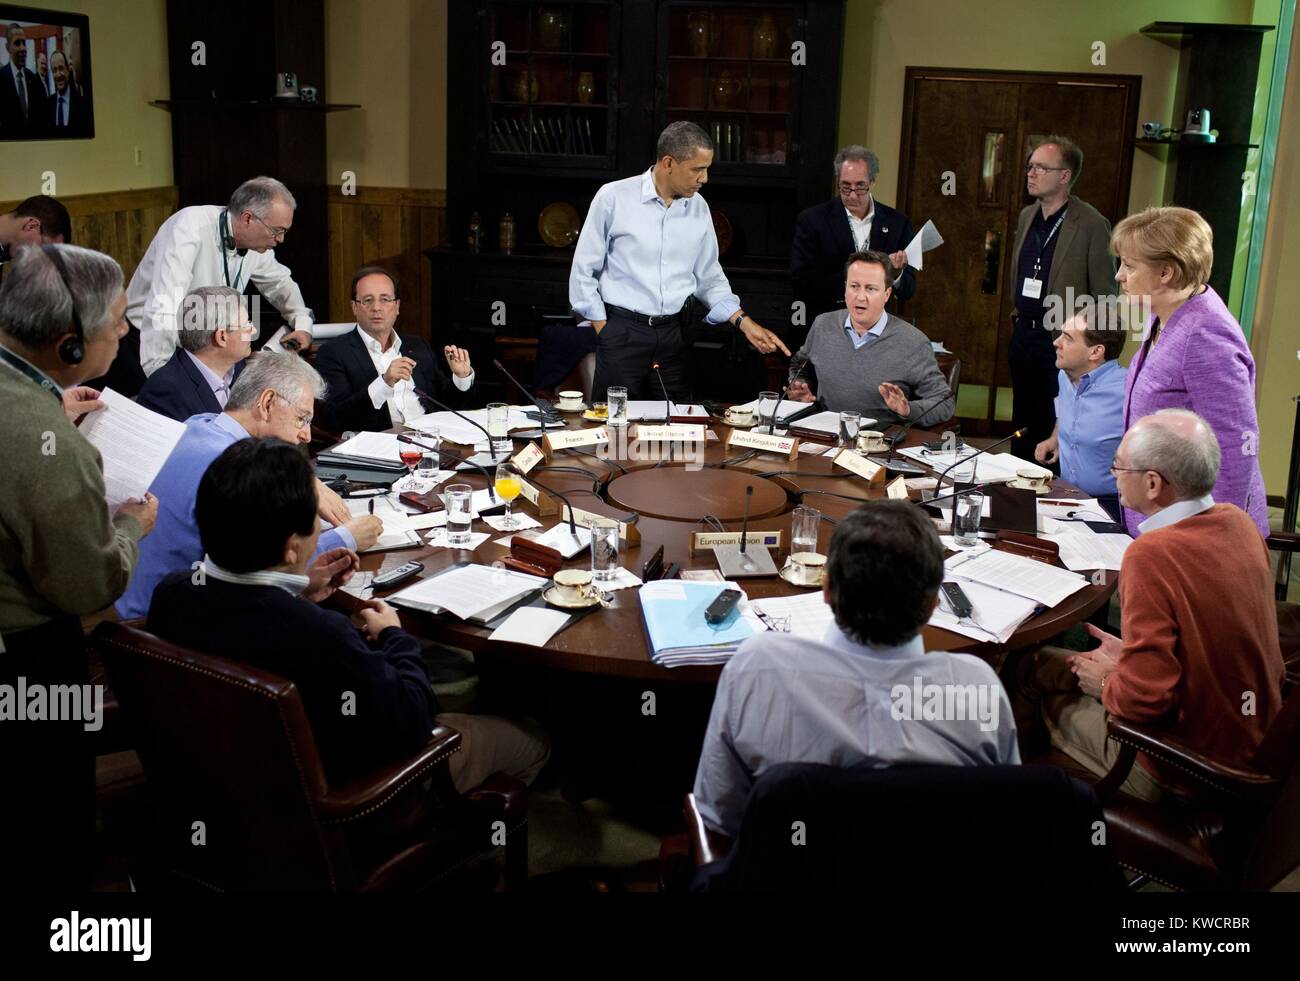 Barack Obama hosts a G8 Summit working session in the dining room of Laurel Cabin at Camp David. Seated facing camera, L-R: Francois Hollande of France; PM David Cameron of Britain; PM Dmitry Medvedev of Russia, (standing) Angela Merkel of Germany. (BSLOC_2015_3_165) Stock Photo